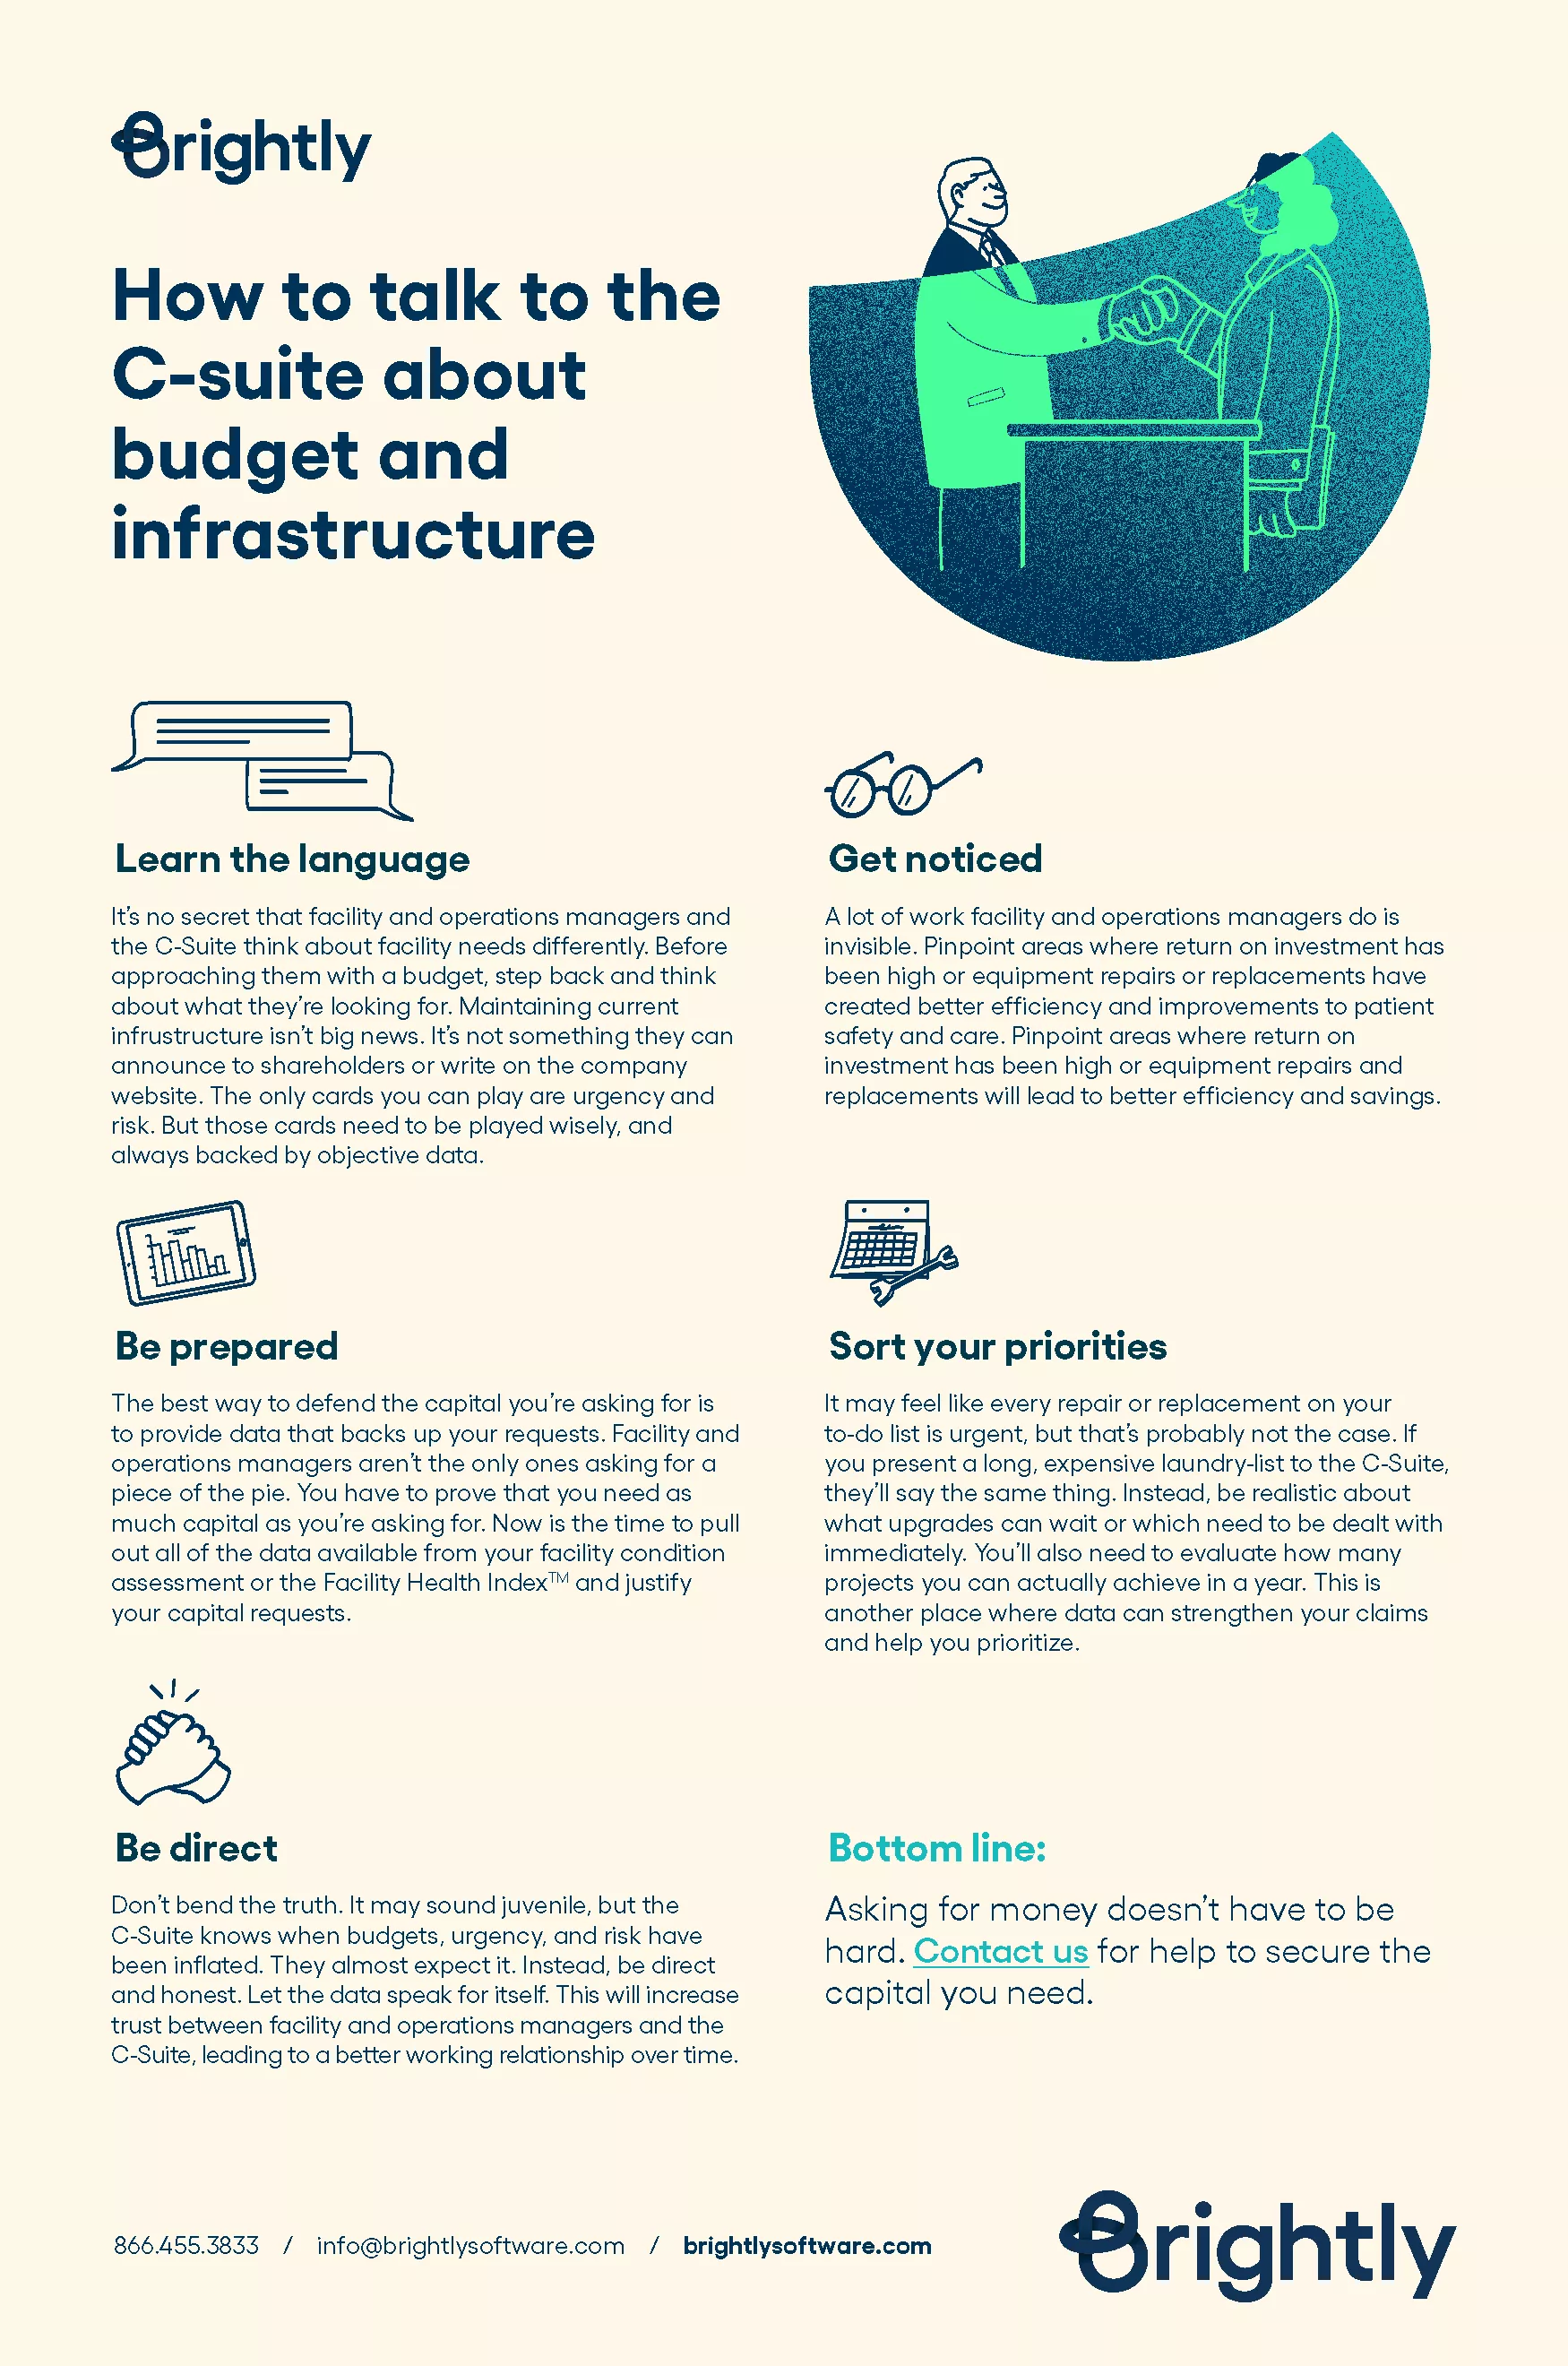 How to talk to the C-suite about budget and infrastructure